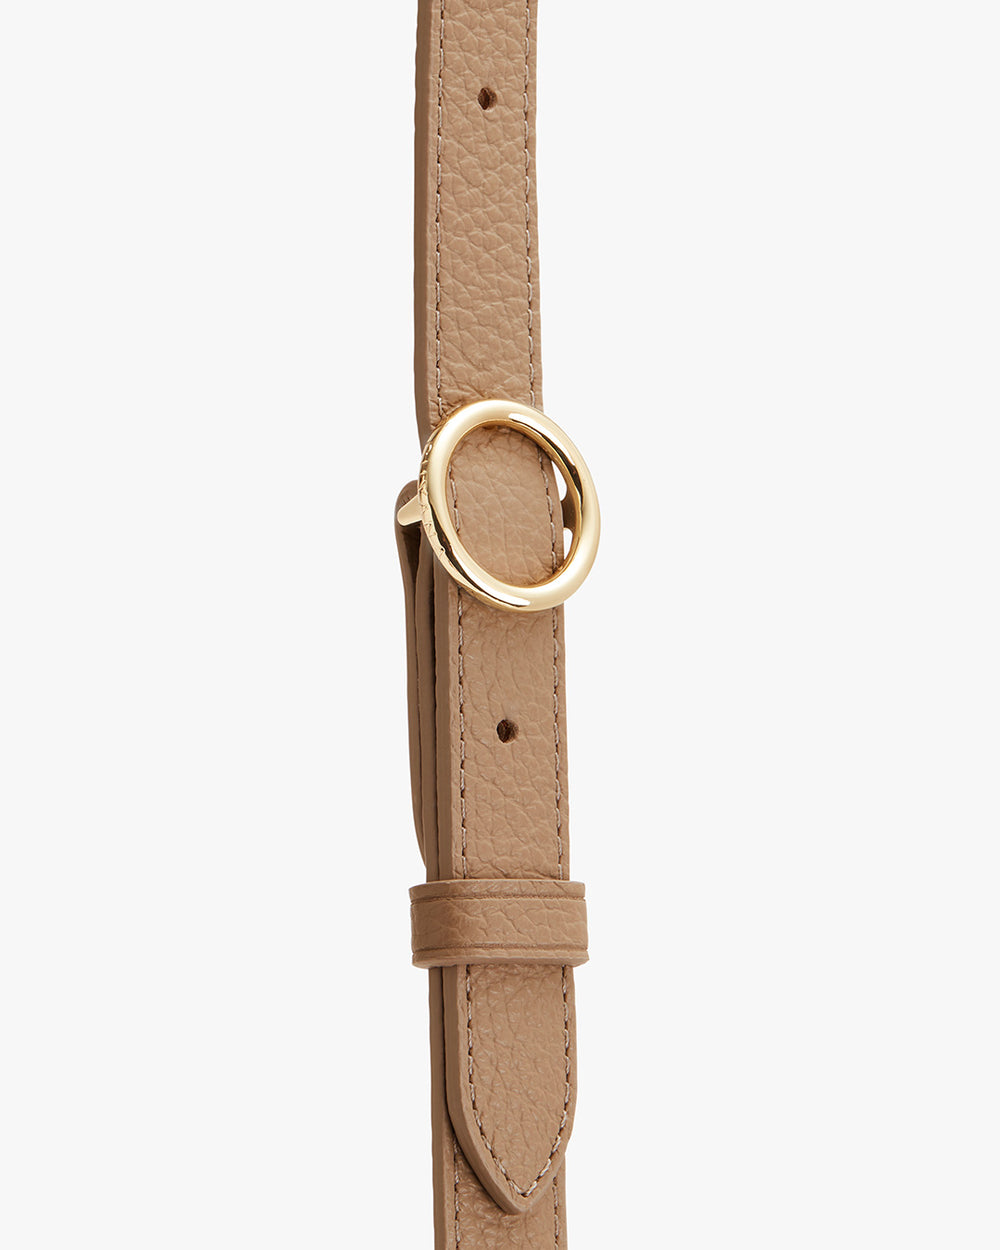 Leather strap with a circular metal buckle on it.